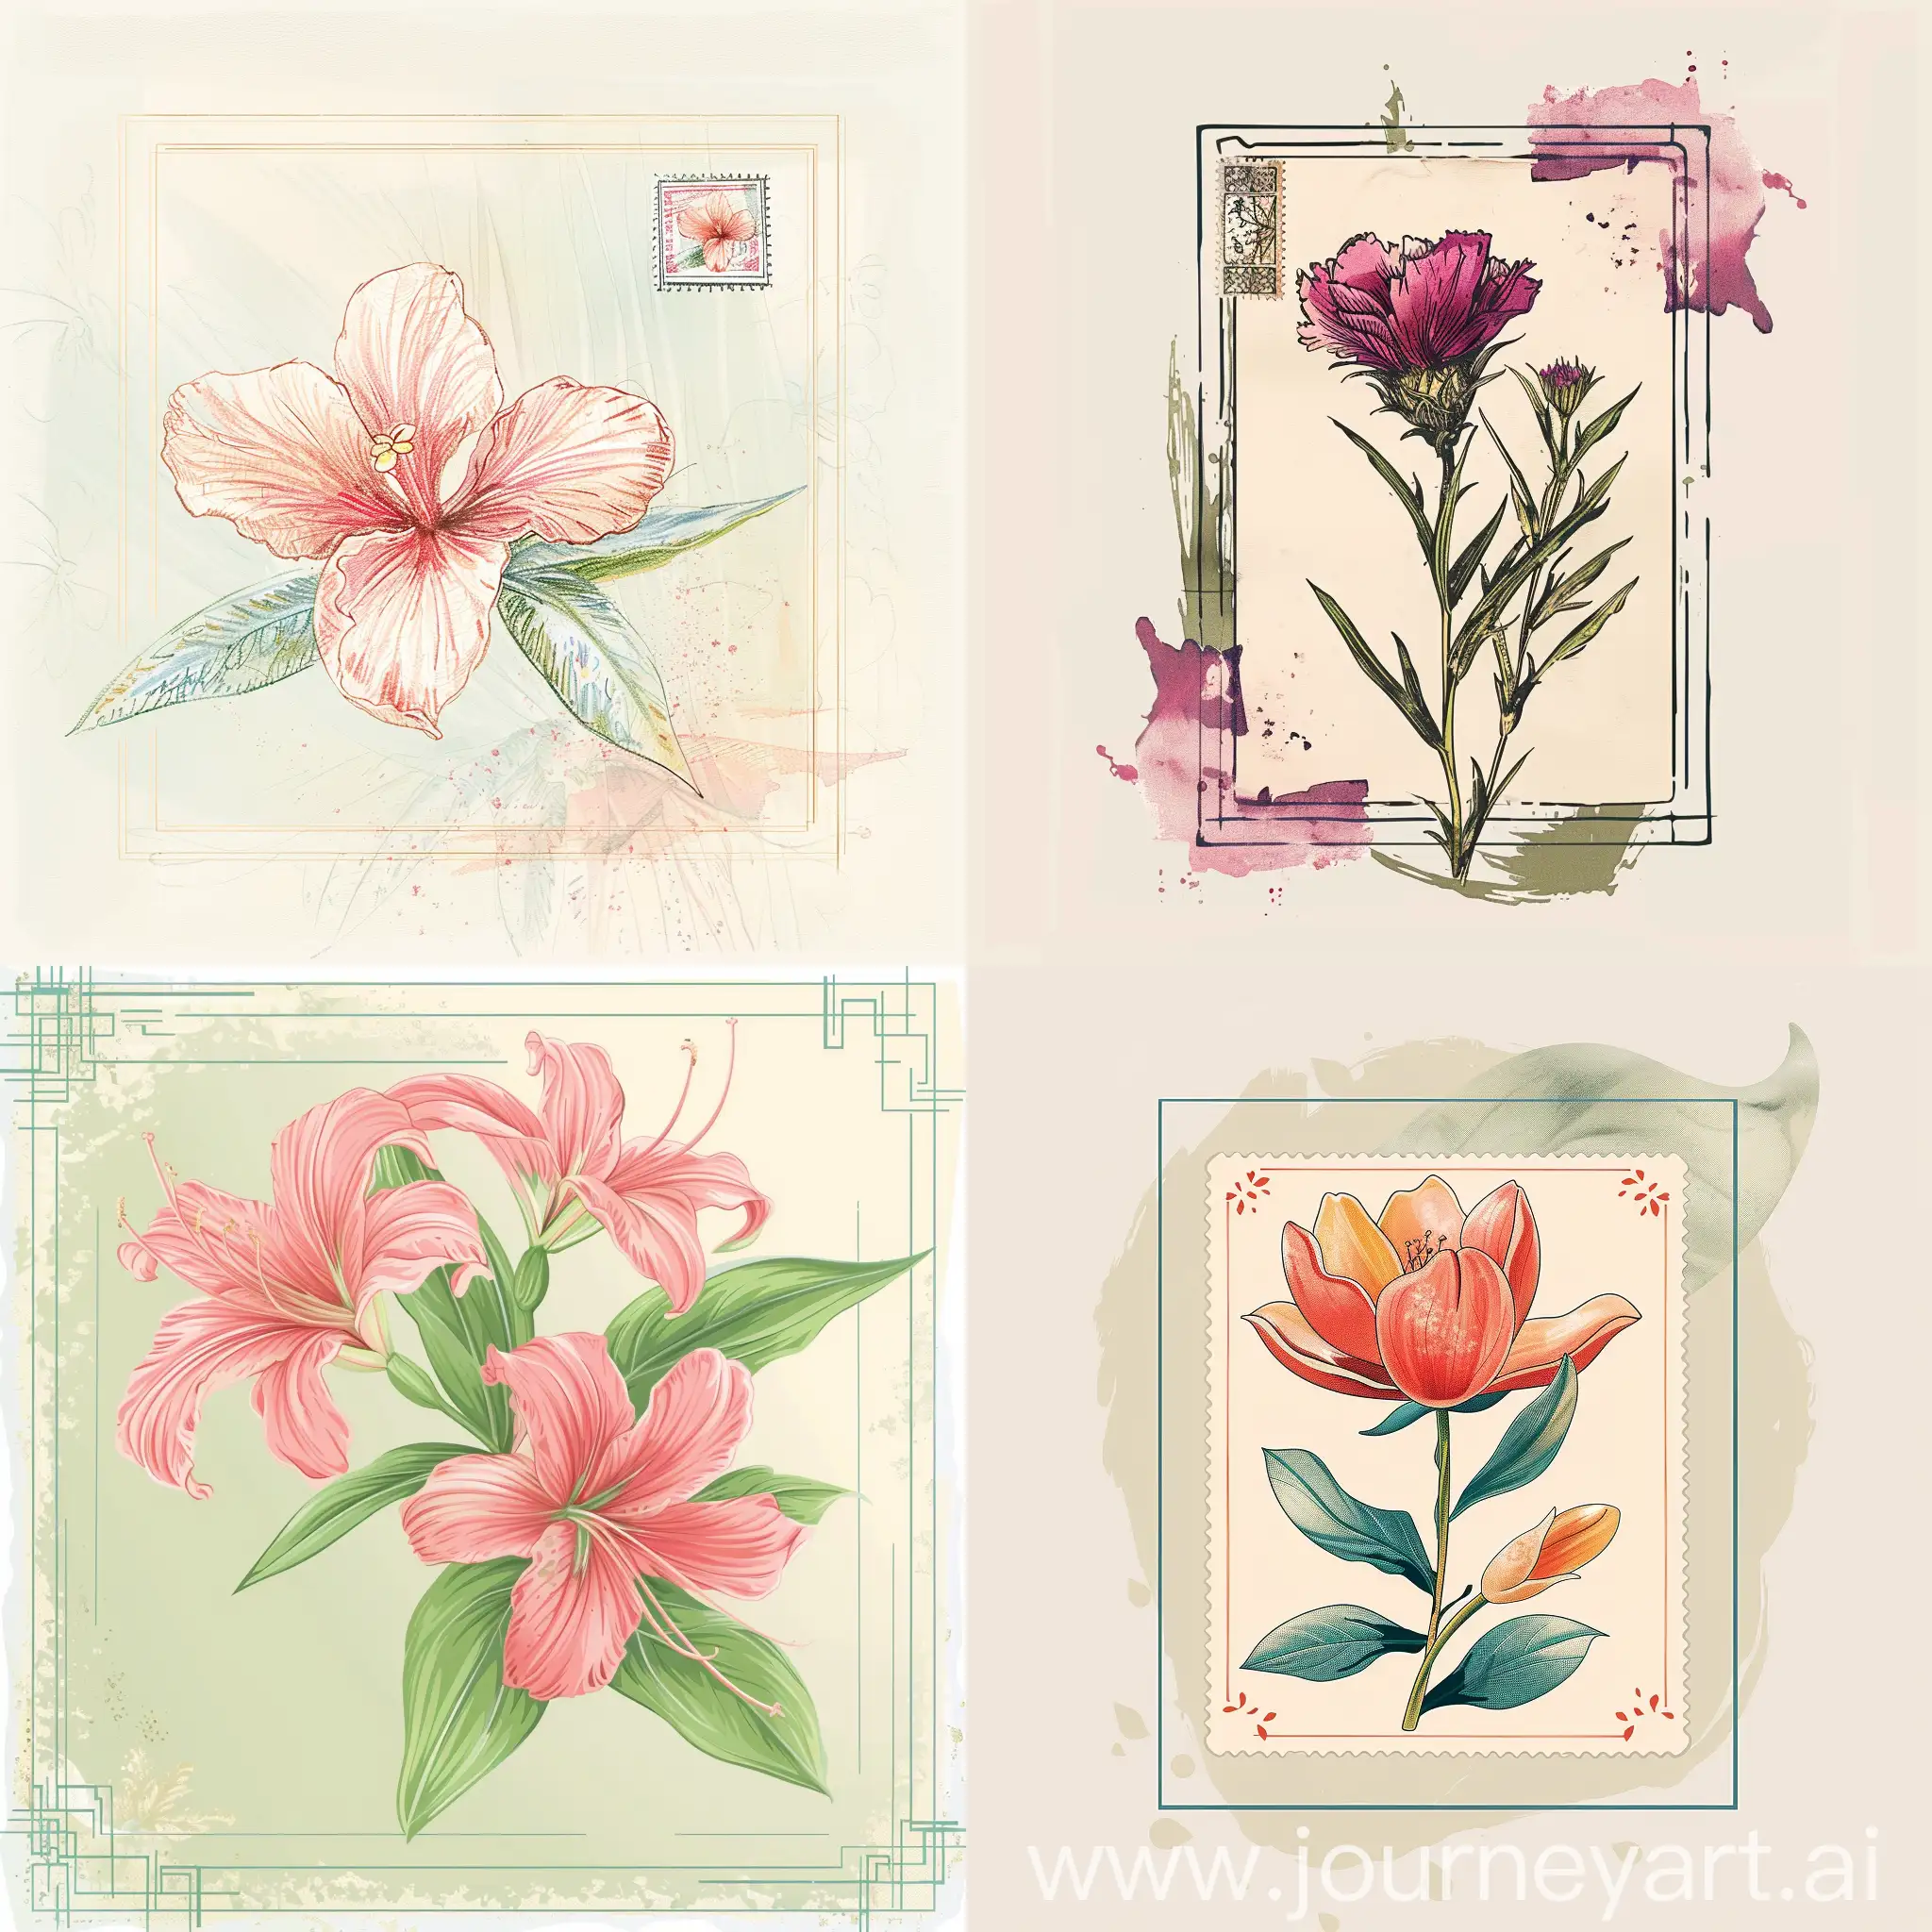 bo ho illustration-drawing style Israeli flowers , in a stamp frame, light colors the flower pops out a bit from the frame